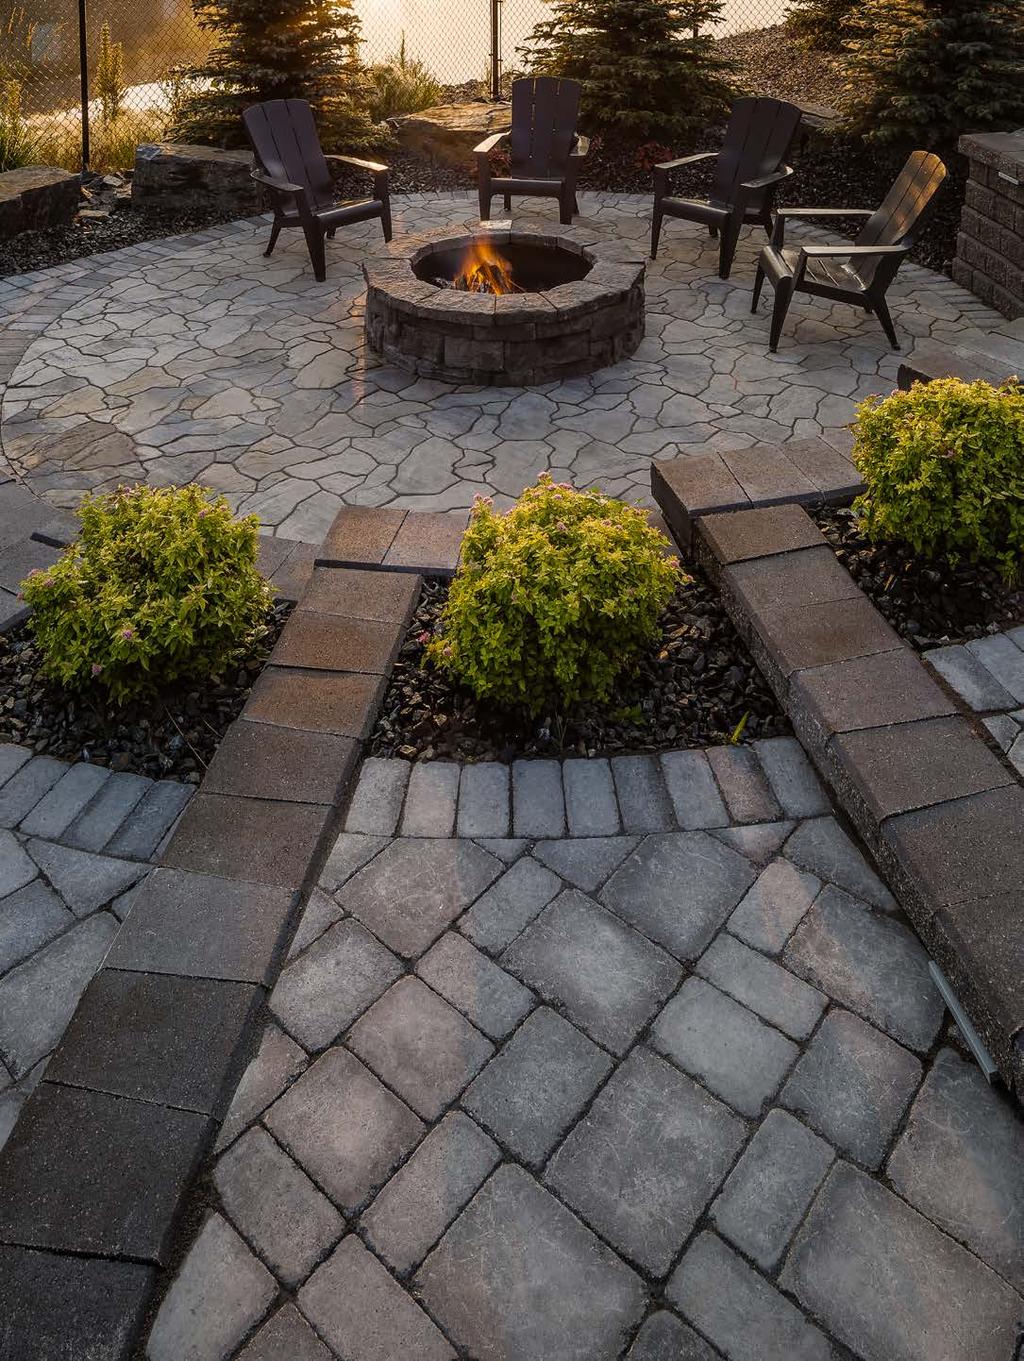 Landscape kits Landscape kits offer a cost effective way to turn any backyard into something special without custom concrete work.